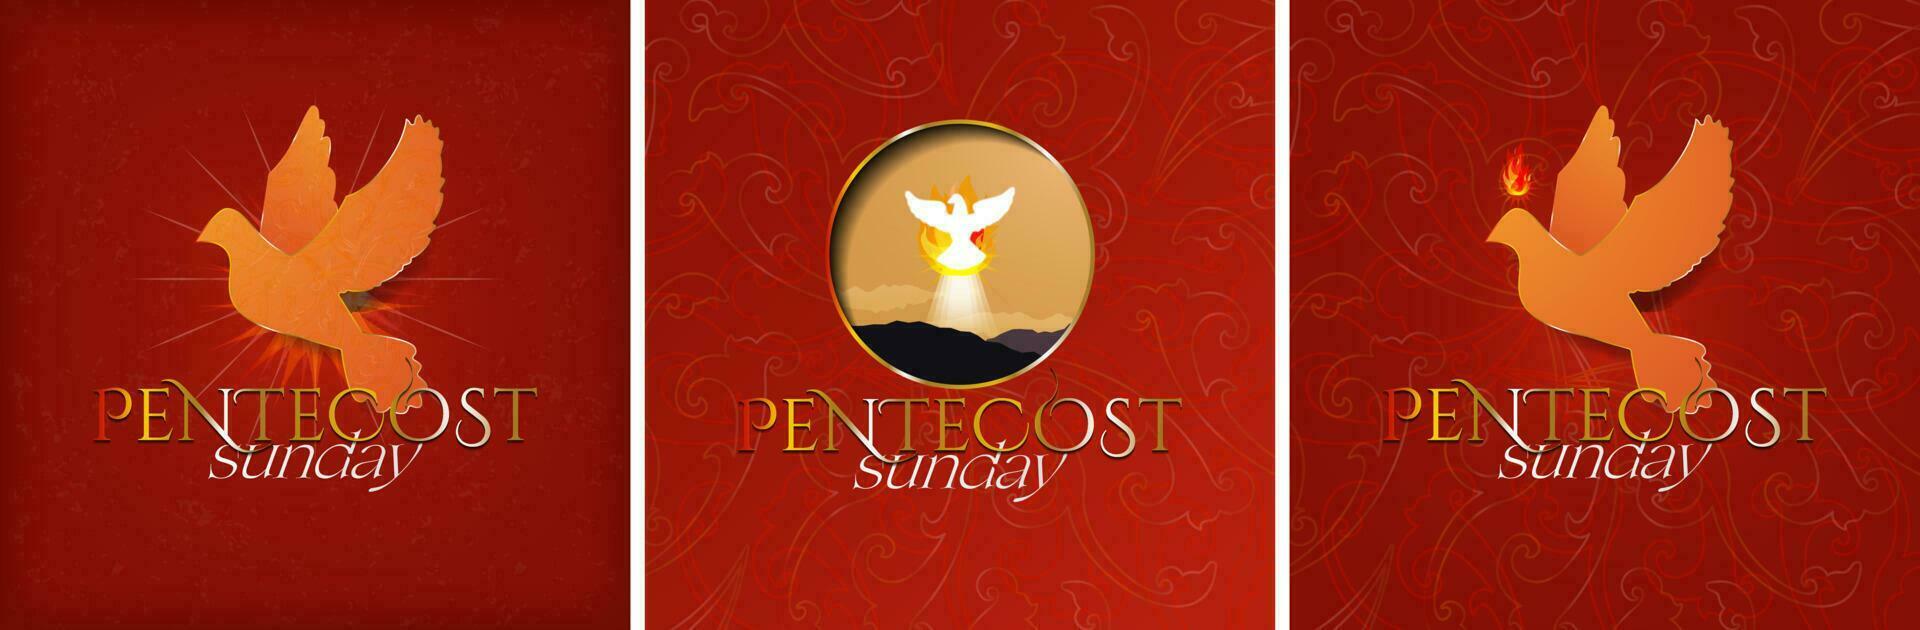 Pentecost Sunday Poster Set. Beautiful Dove Silhouette with pentecostal fire and light. Pentecost icon on red background. EPS 10 vector